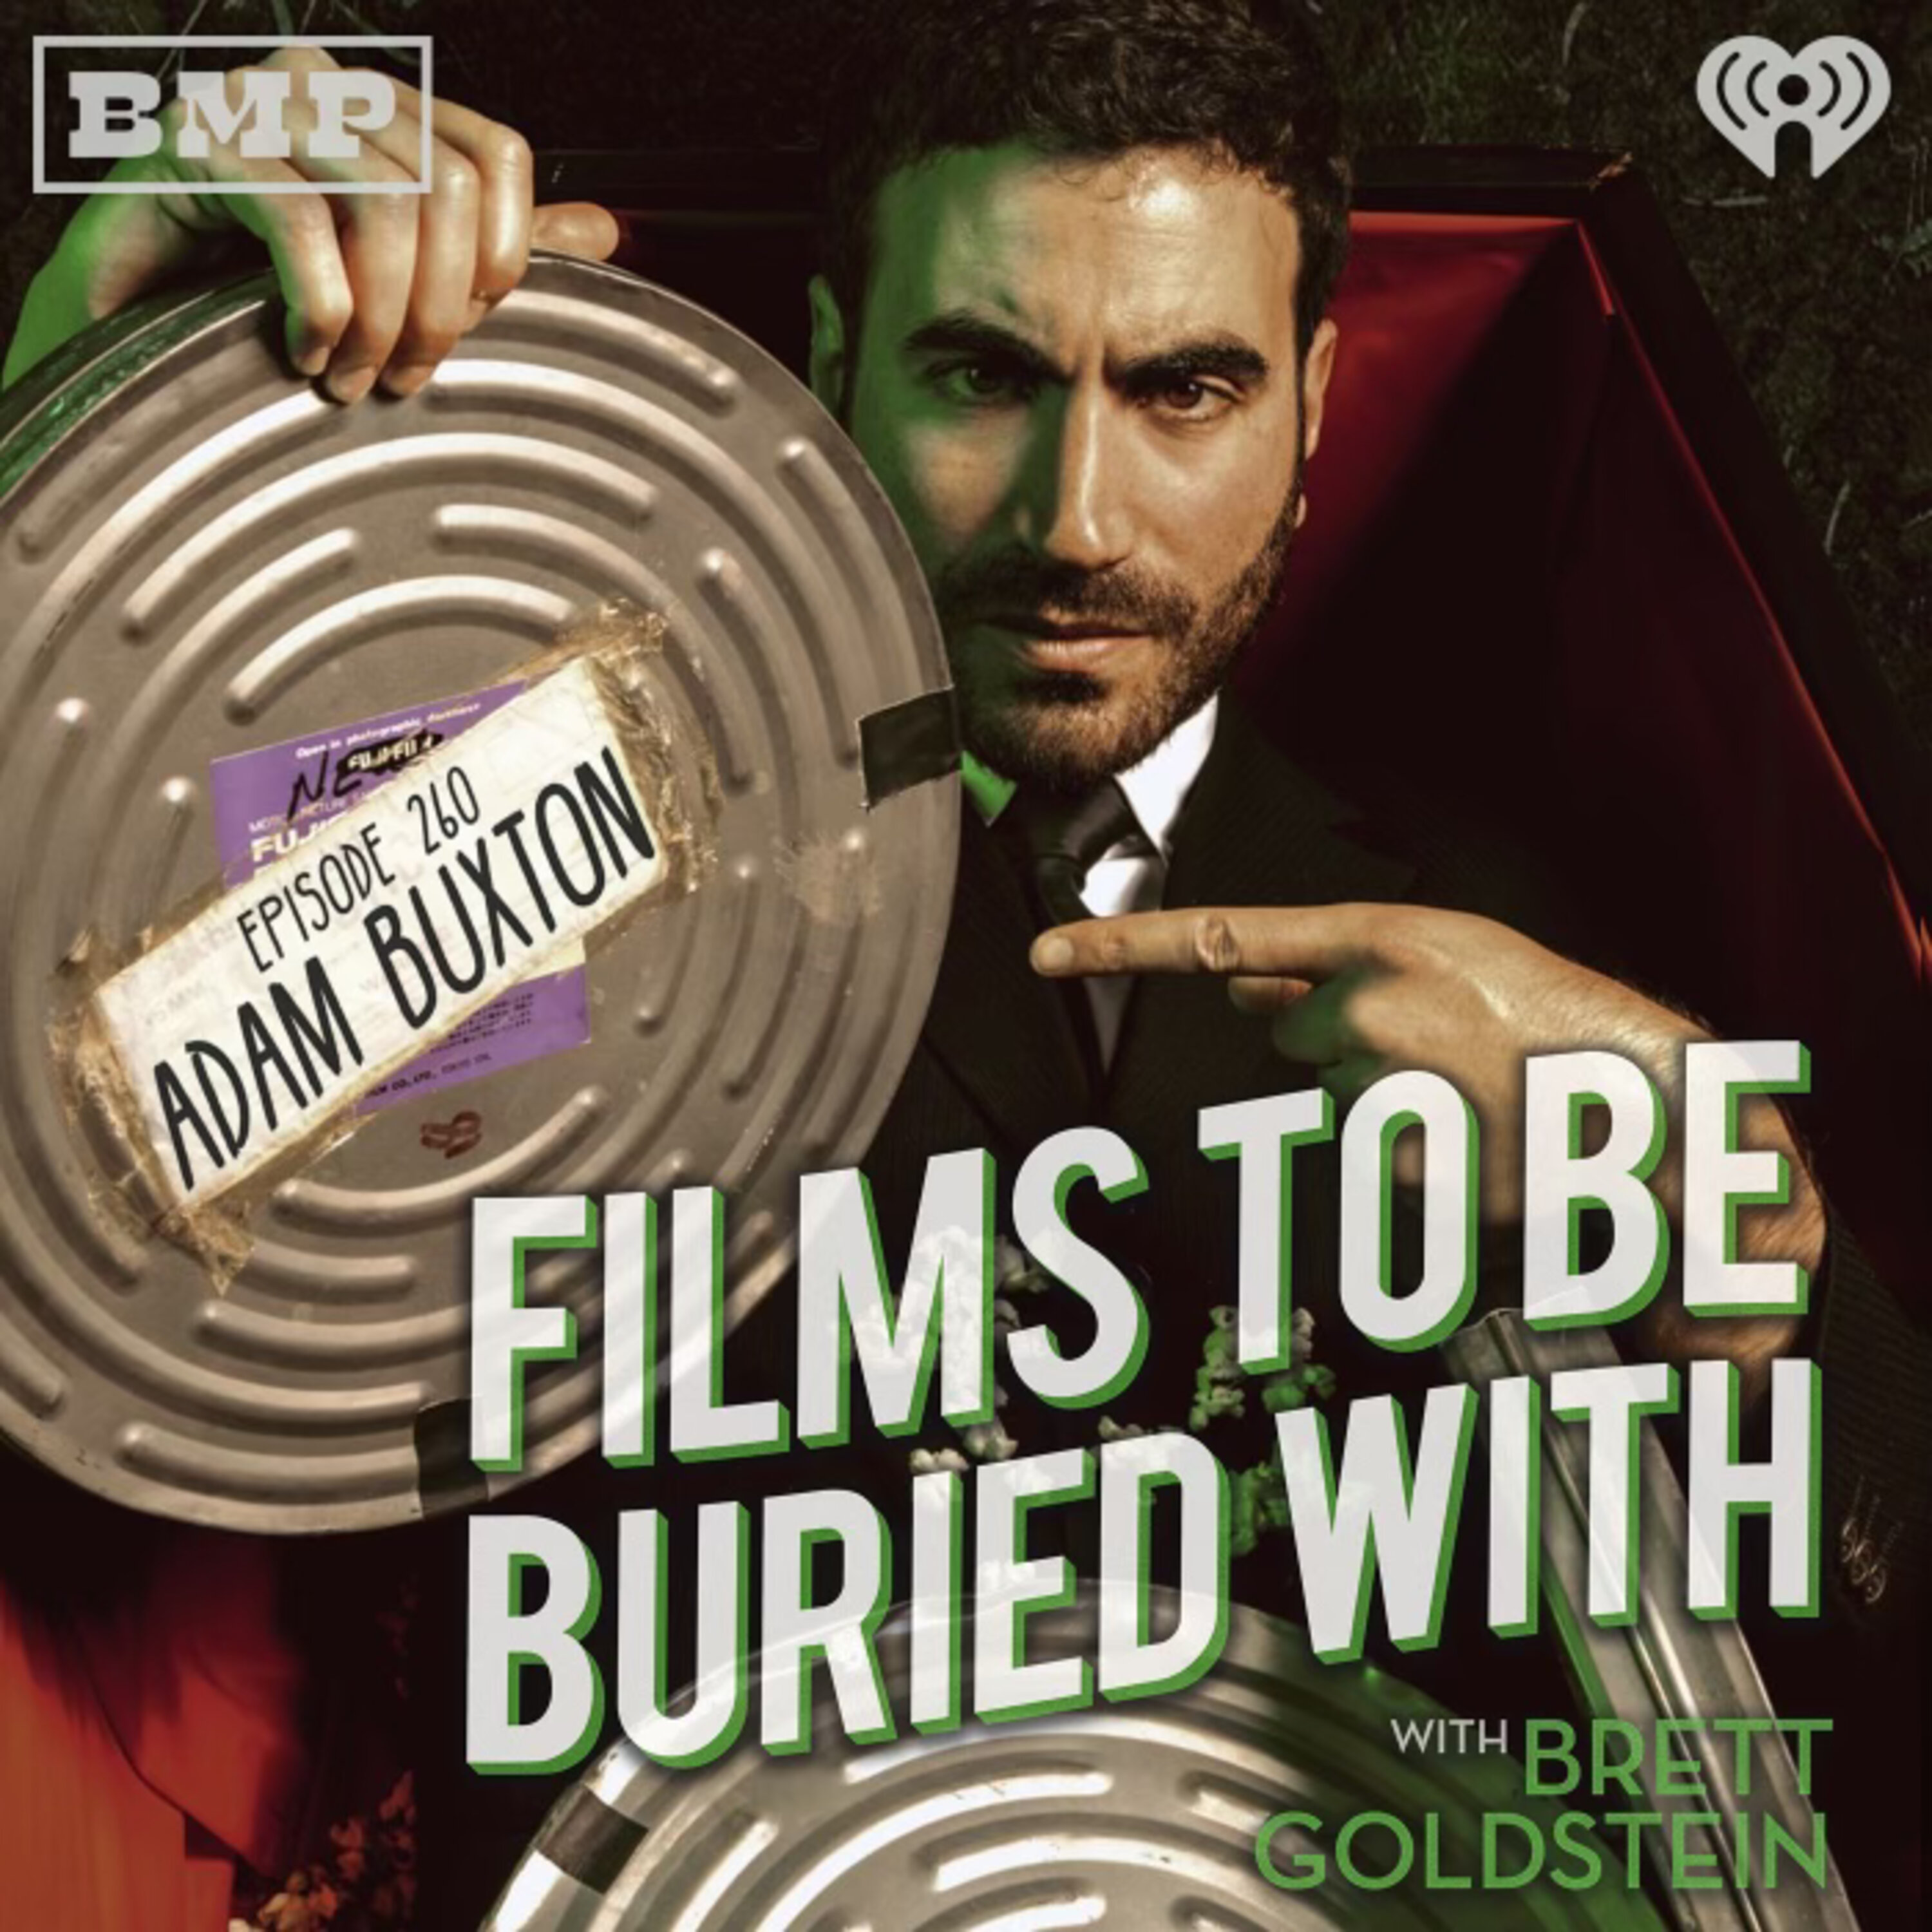 Adam Buxton • Films To Be Buried With with Brett Goldstein #260